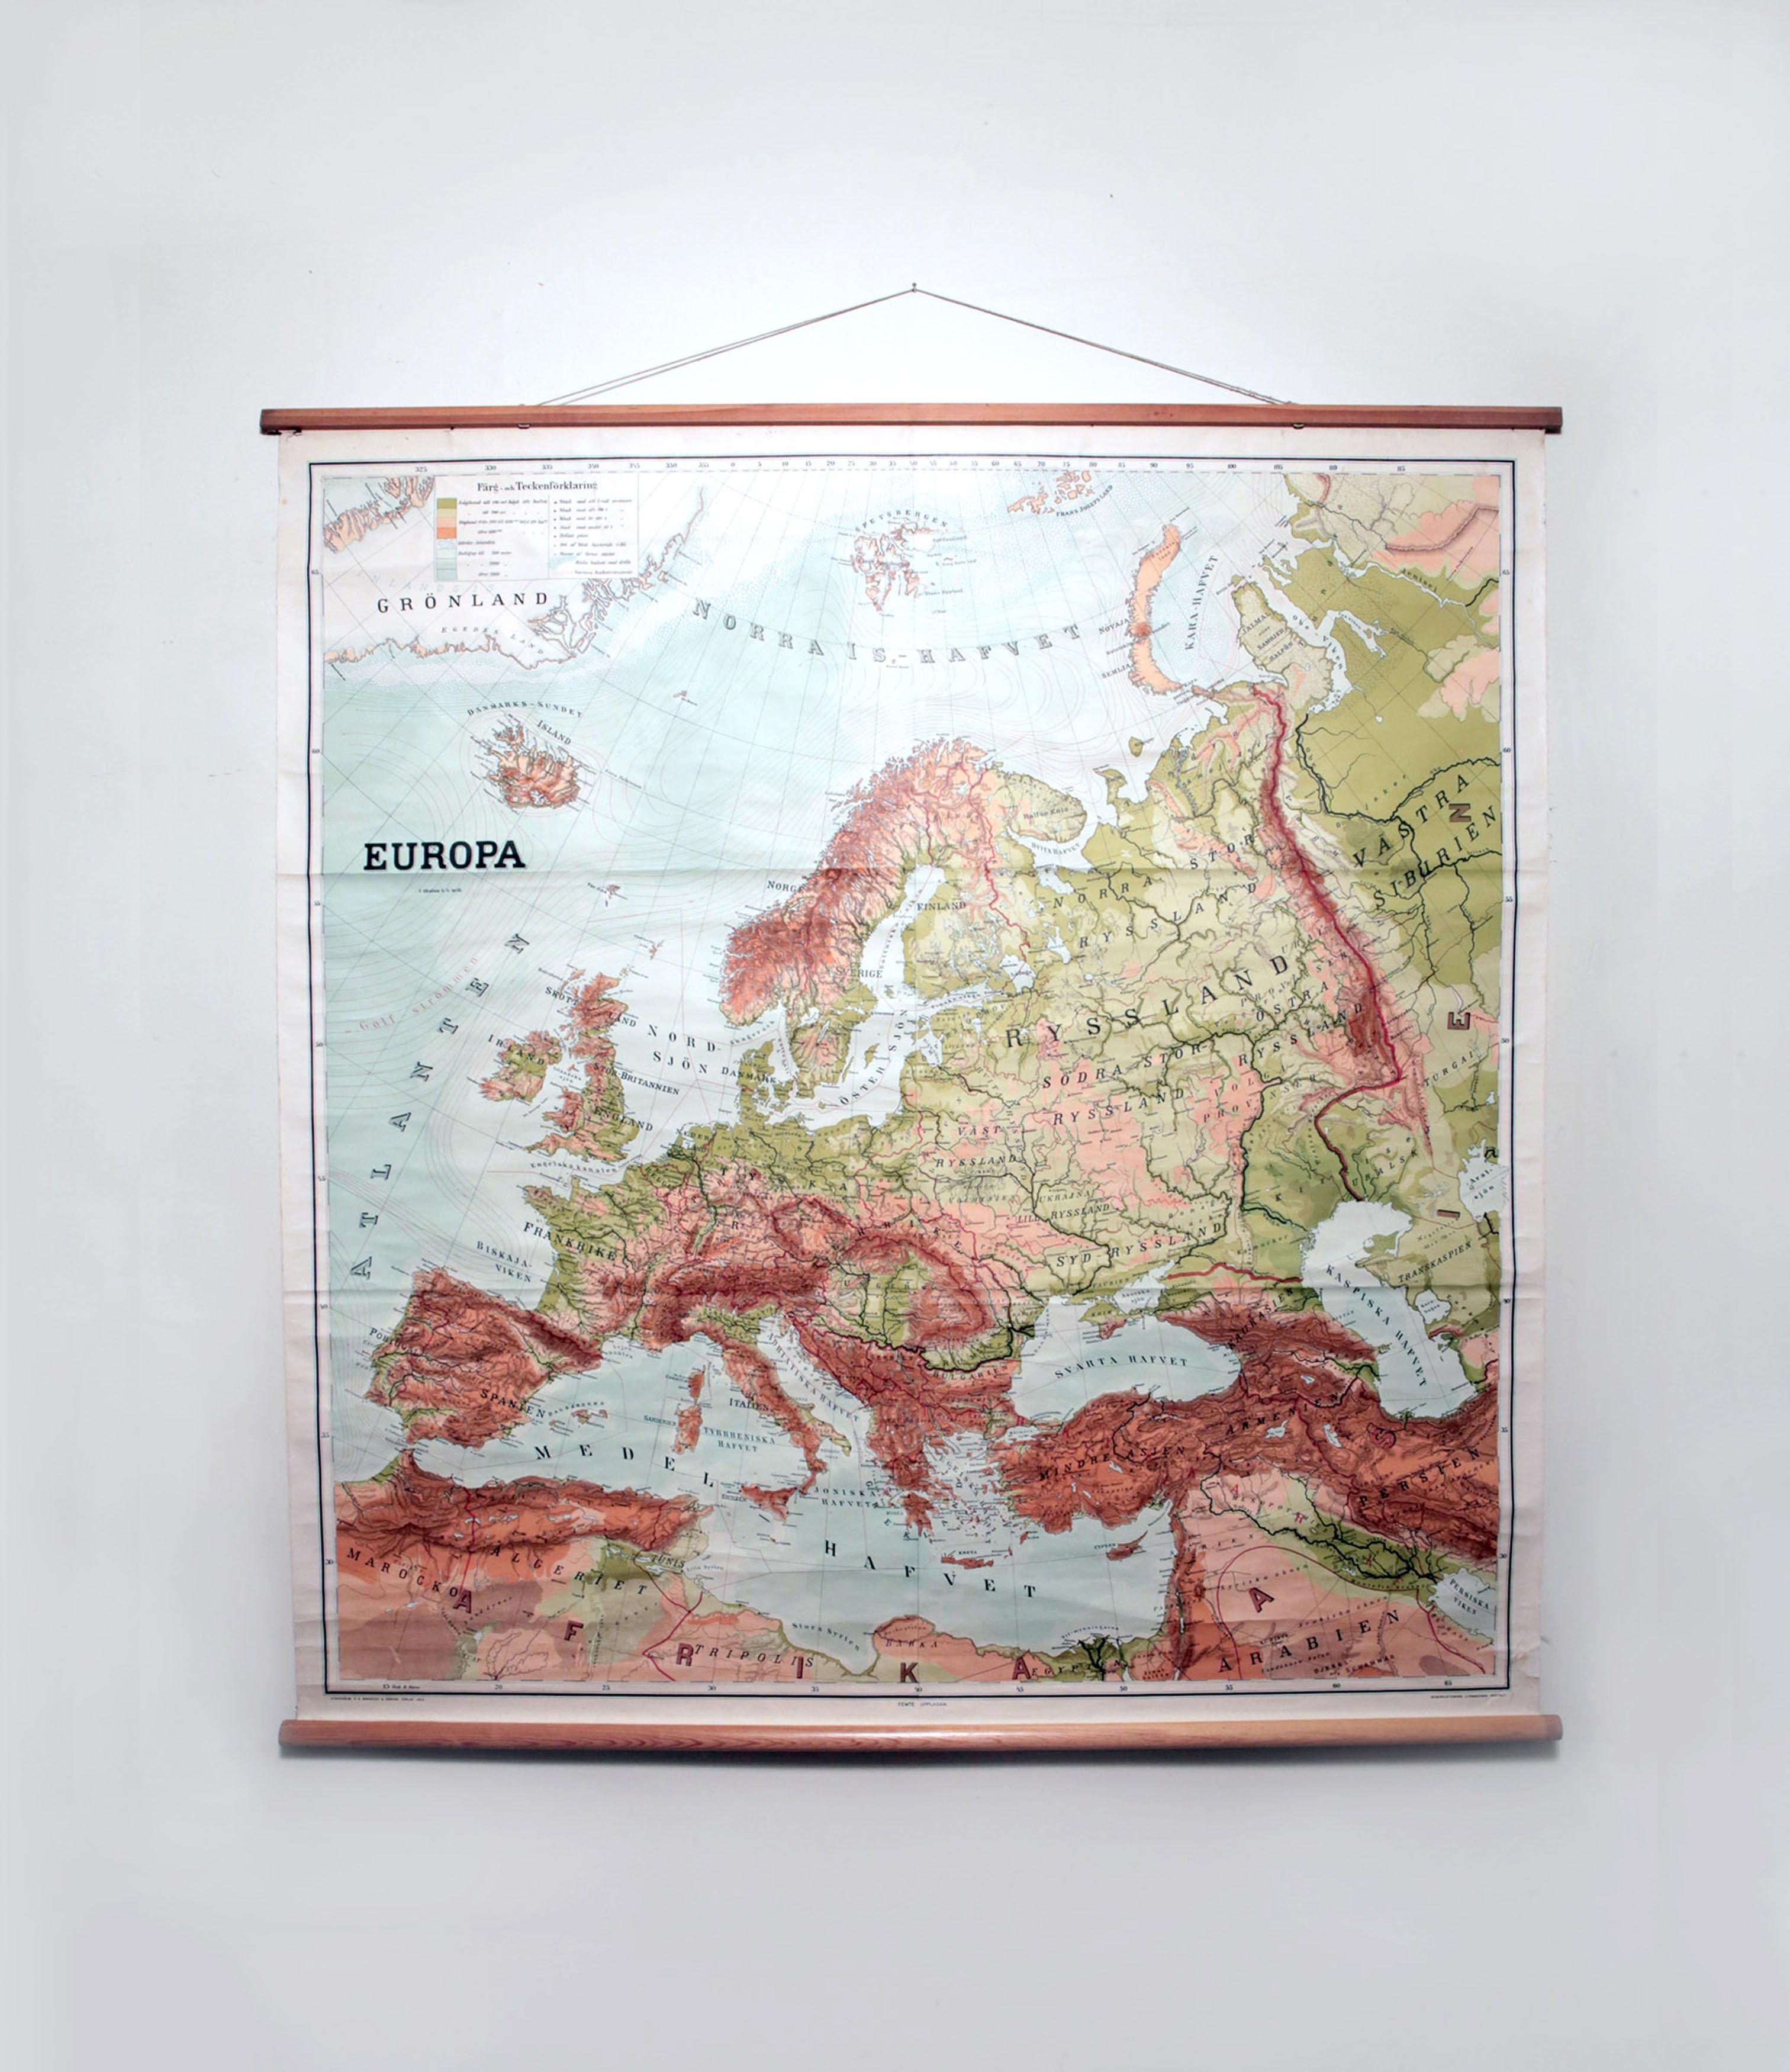 Vintage Swedish School Map of Europe - LARGE - Made in Sweden, 1905

This vintage Swedish school map is so unique and a great example of why these are so collectible.

Wooden poles at the top and bottom of this linen fabric with printed paper